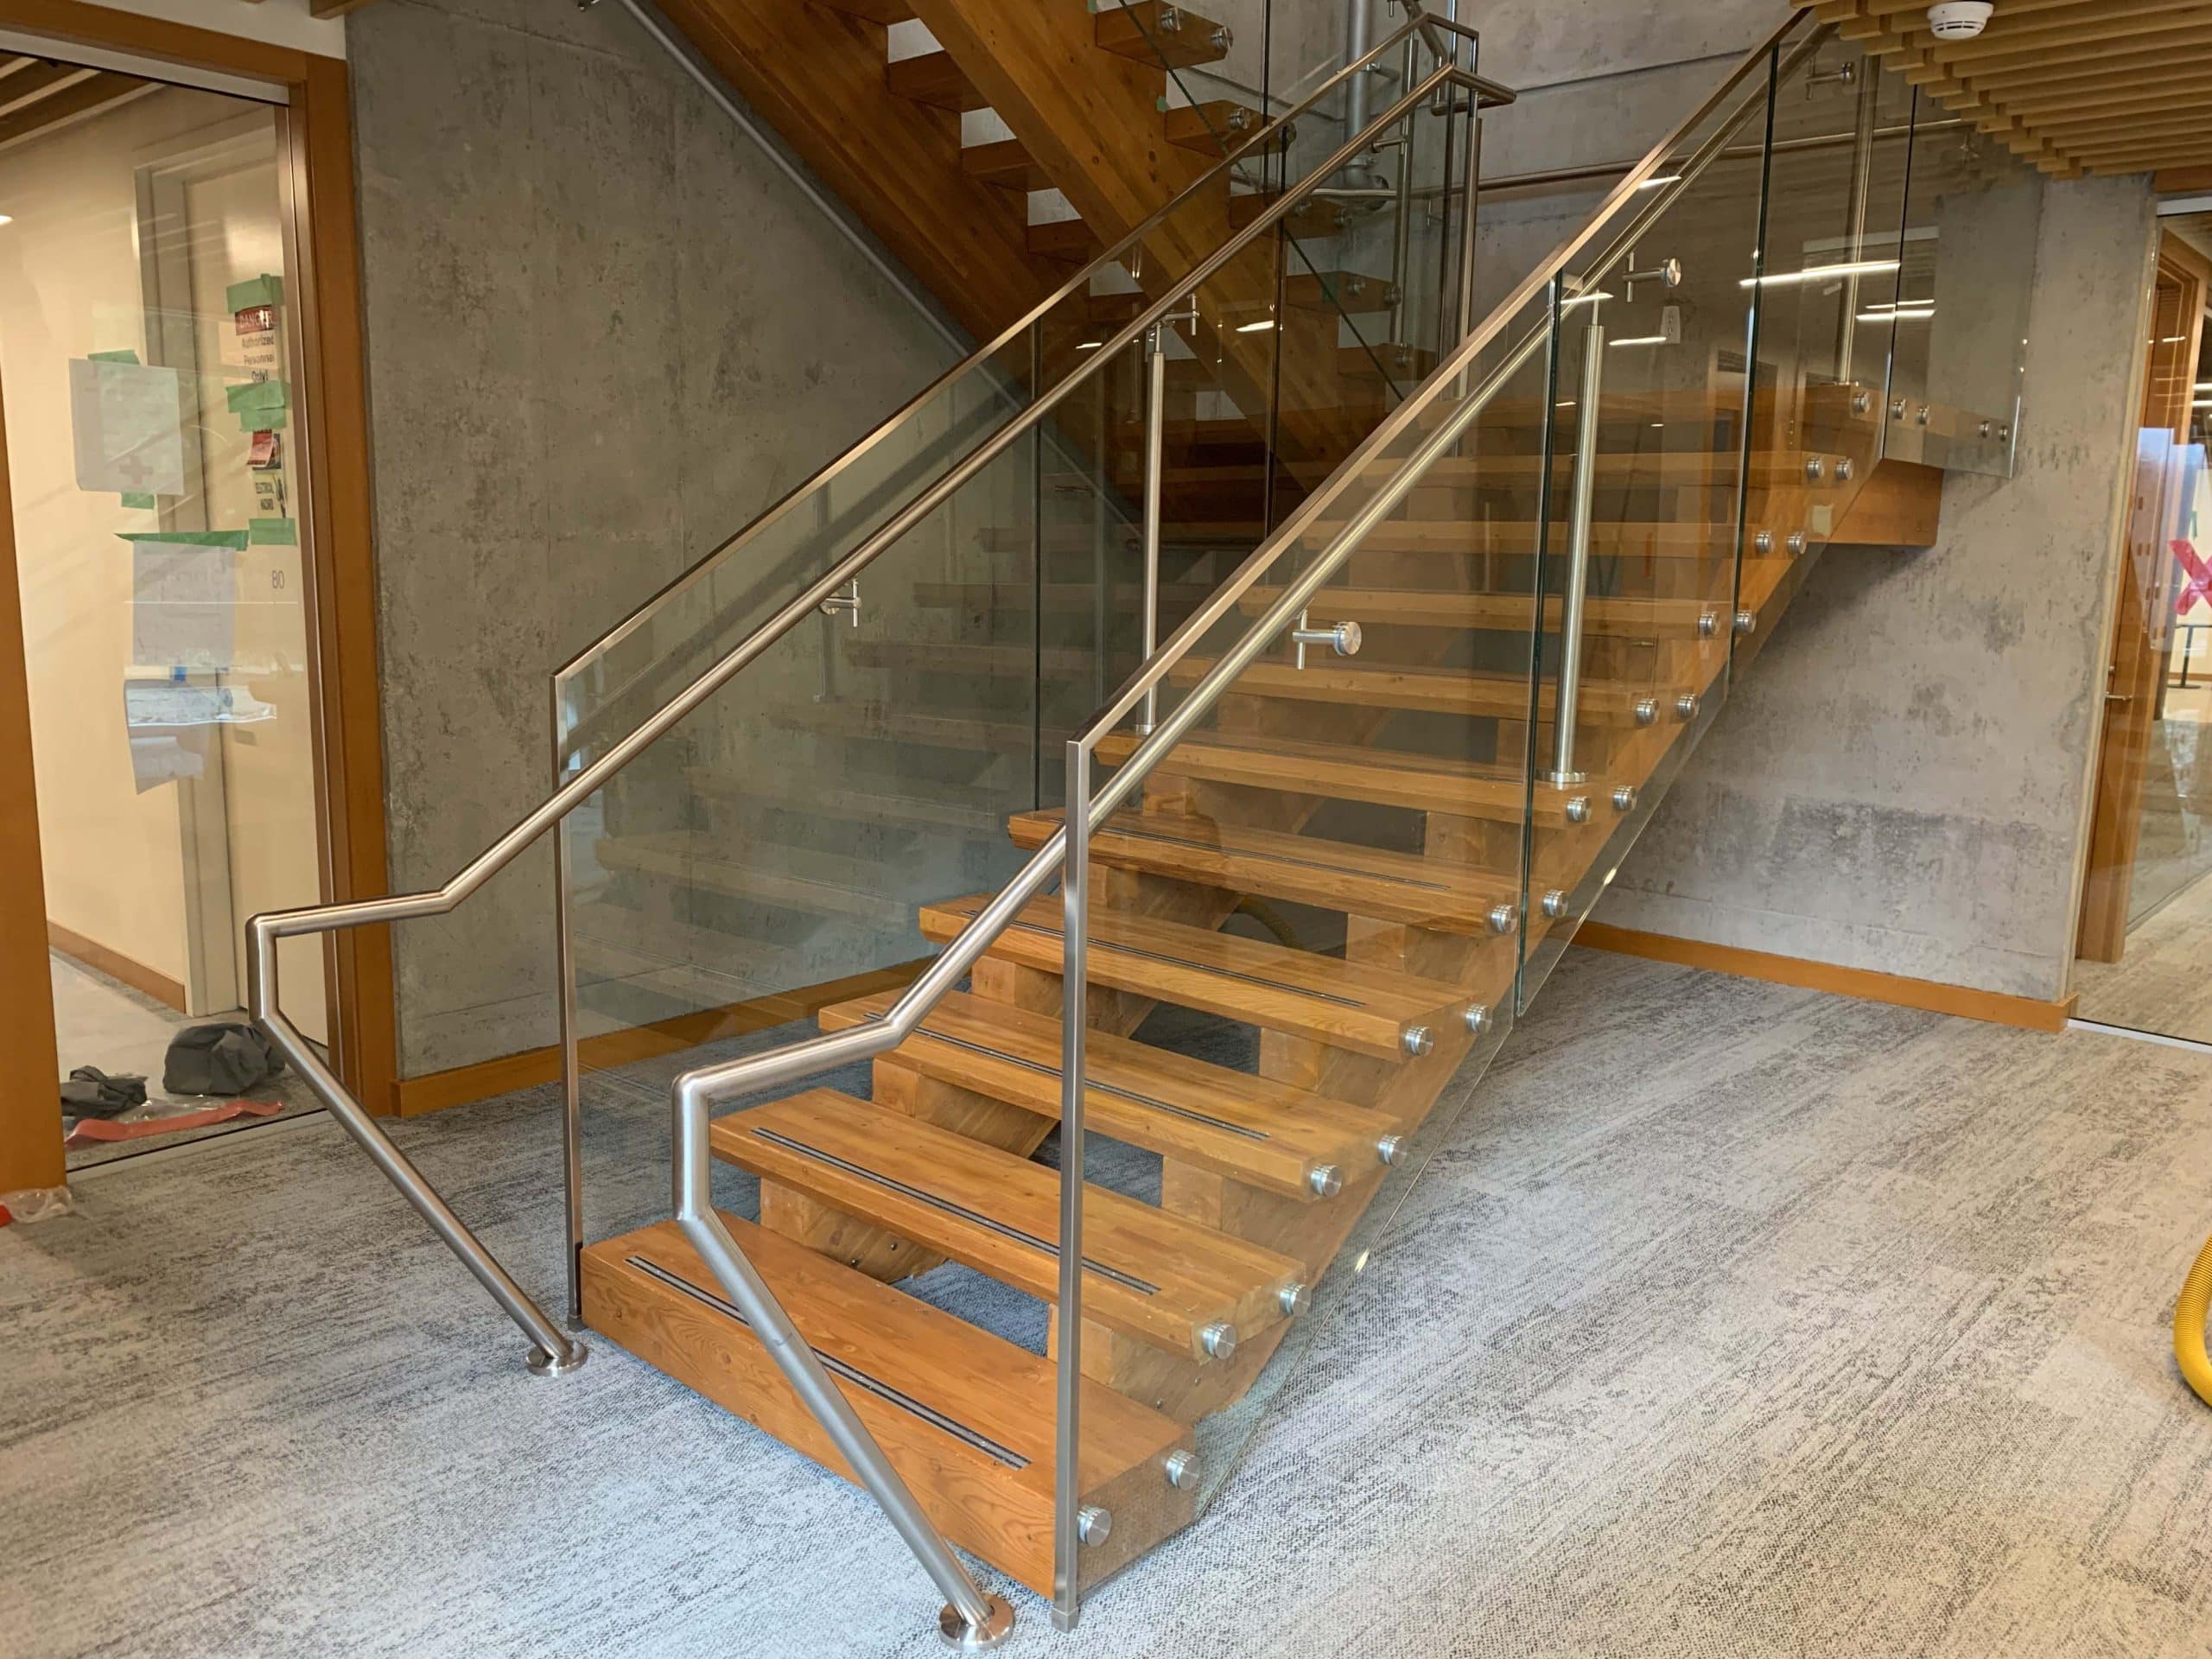 A modern staircase with glass railings and wooden handrails.